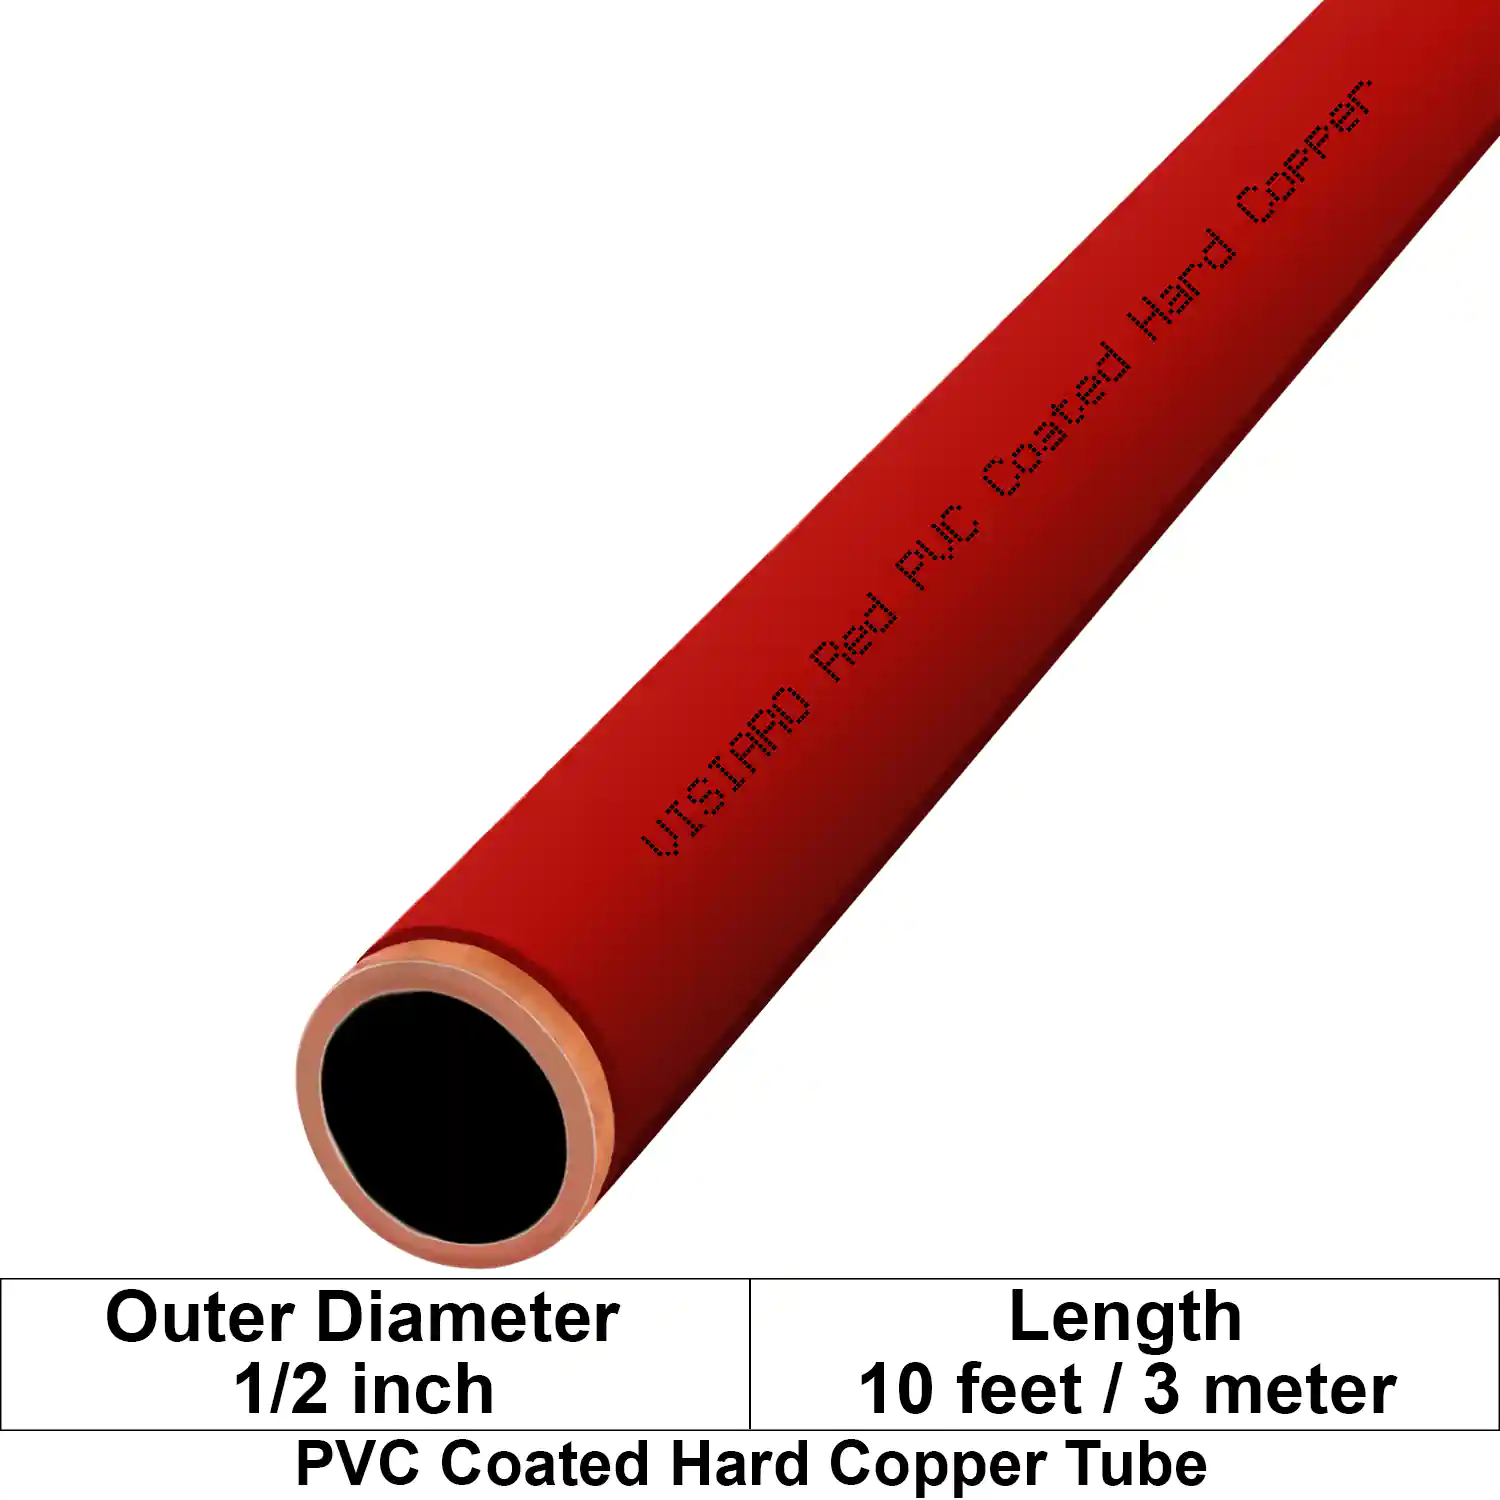 Visiaro Red PVC Coated Hard Copper Tube 10ft long Outer Diameter - 1/2 inch